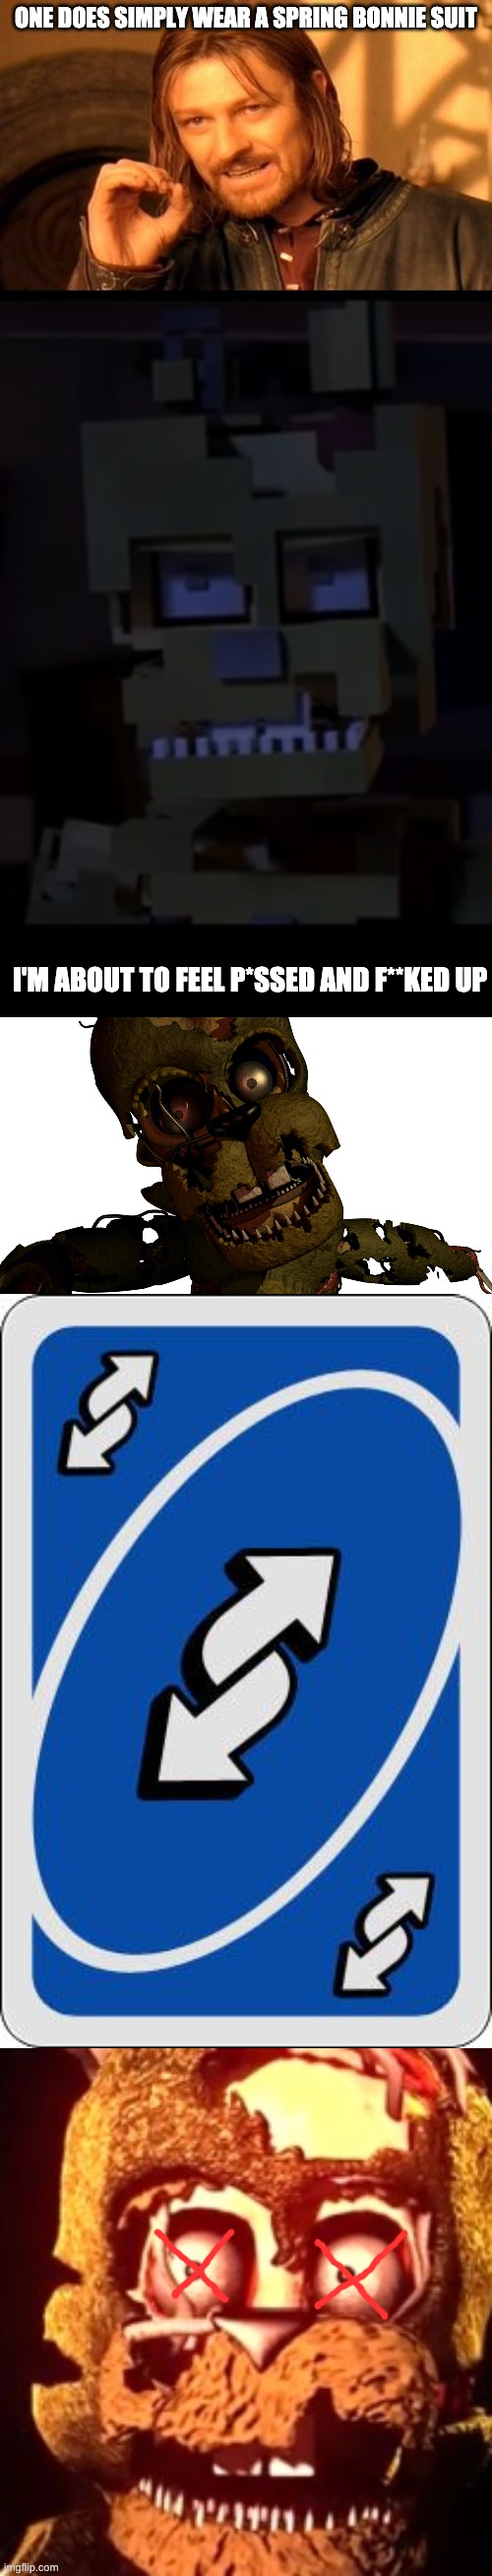 I killed Scraptrap by Uno Reverse Card | ONE DOES SIMPLY WEAR A SPRING BONNIE SUIT; I'M ABOUT TO FEEL P*SSED AND F**KED UP | image tagged in memes,one does not simply,scraptrap,uno reverse card,scraptrap what the fu-,fnaf | made w/ Imgflip meme maker